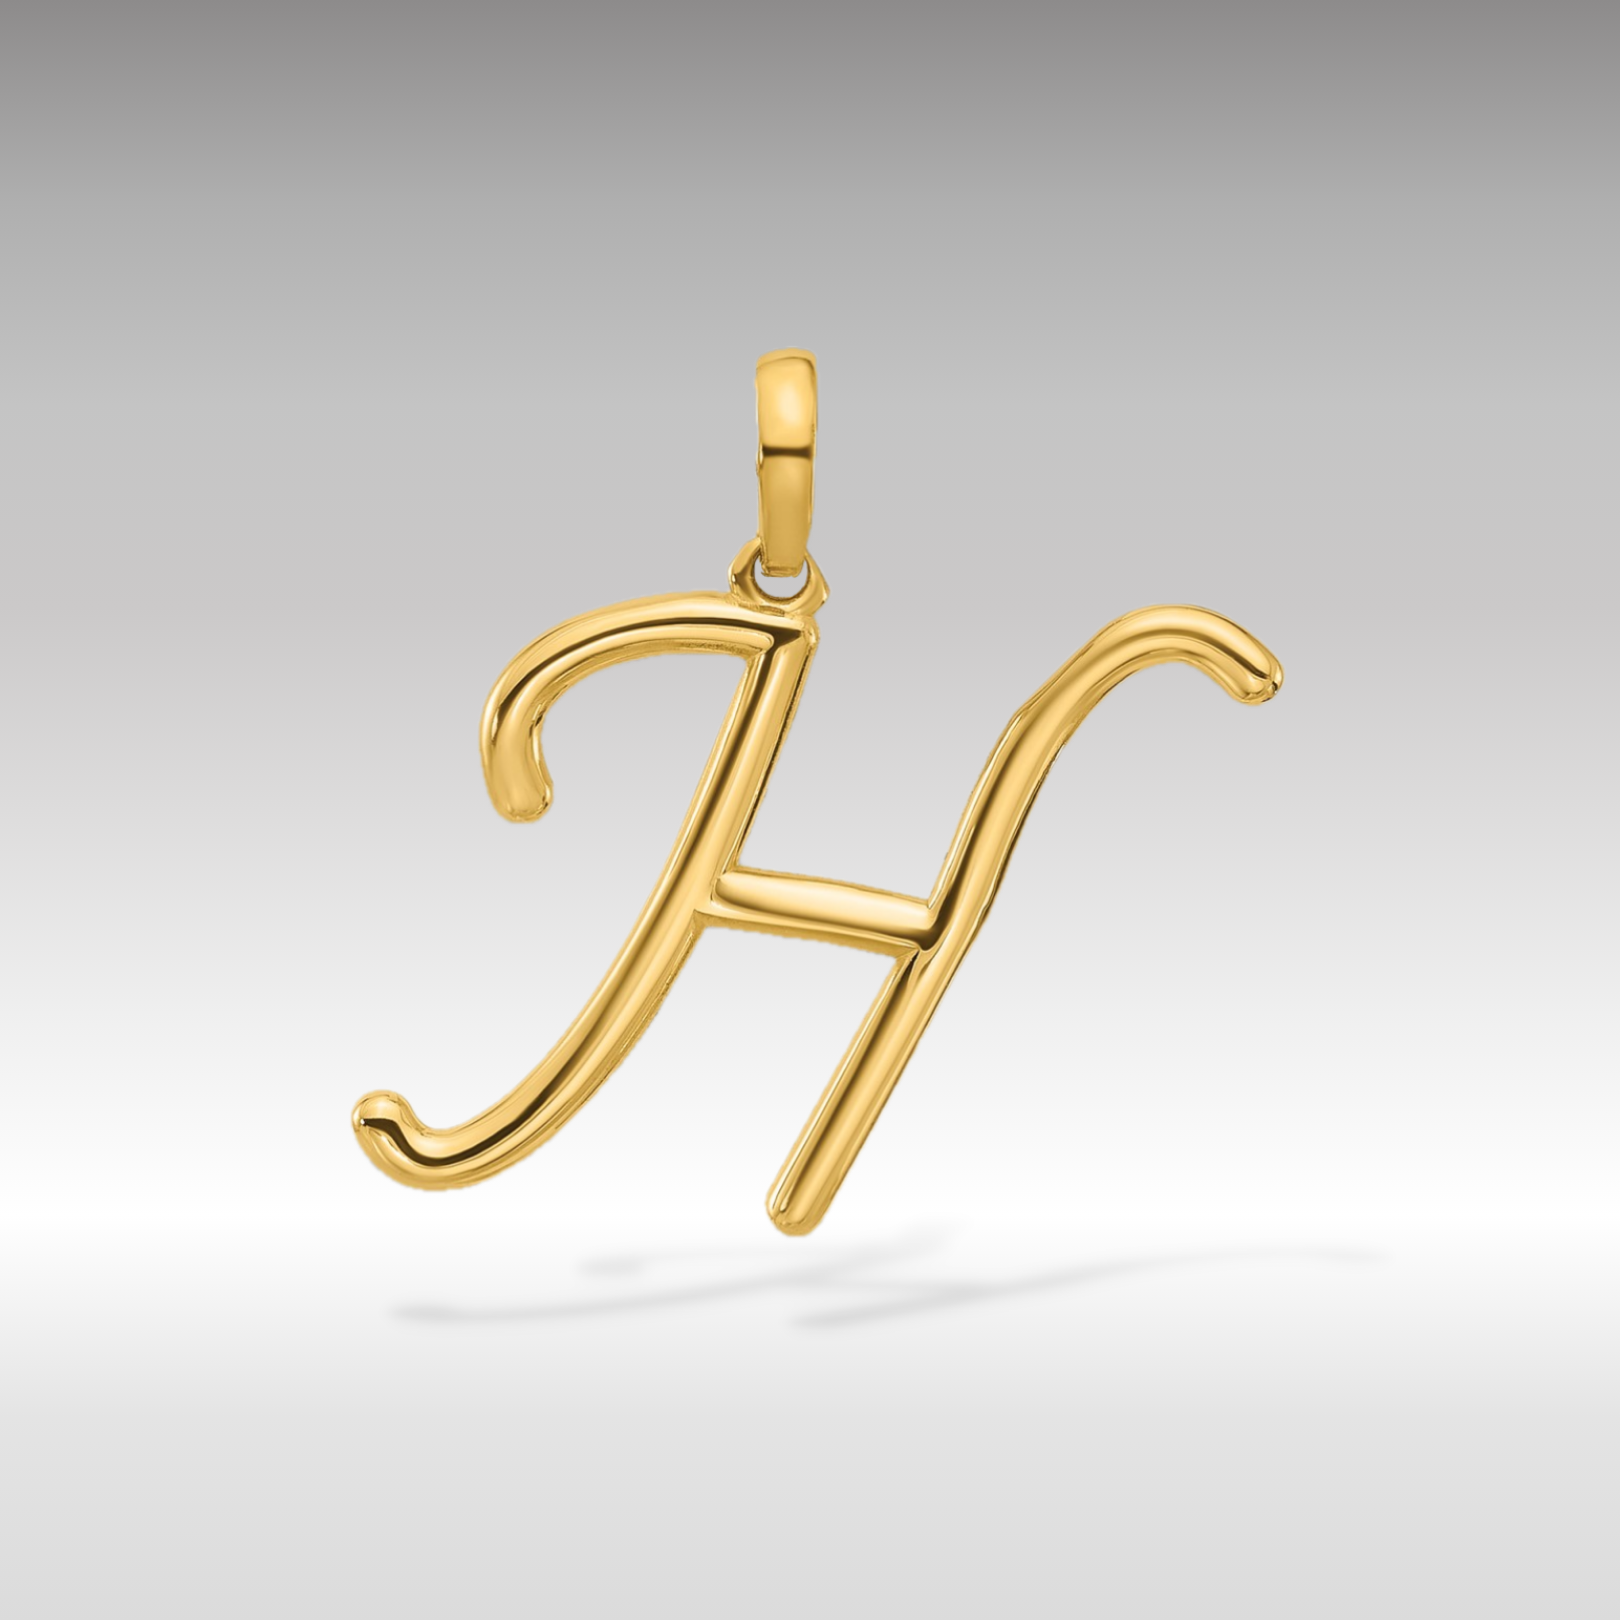 14K Gold Fancy Letter 'H' Charm Pendant - Charlie & Co. Jewelry